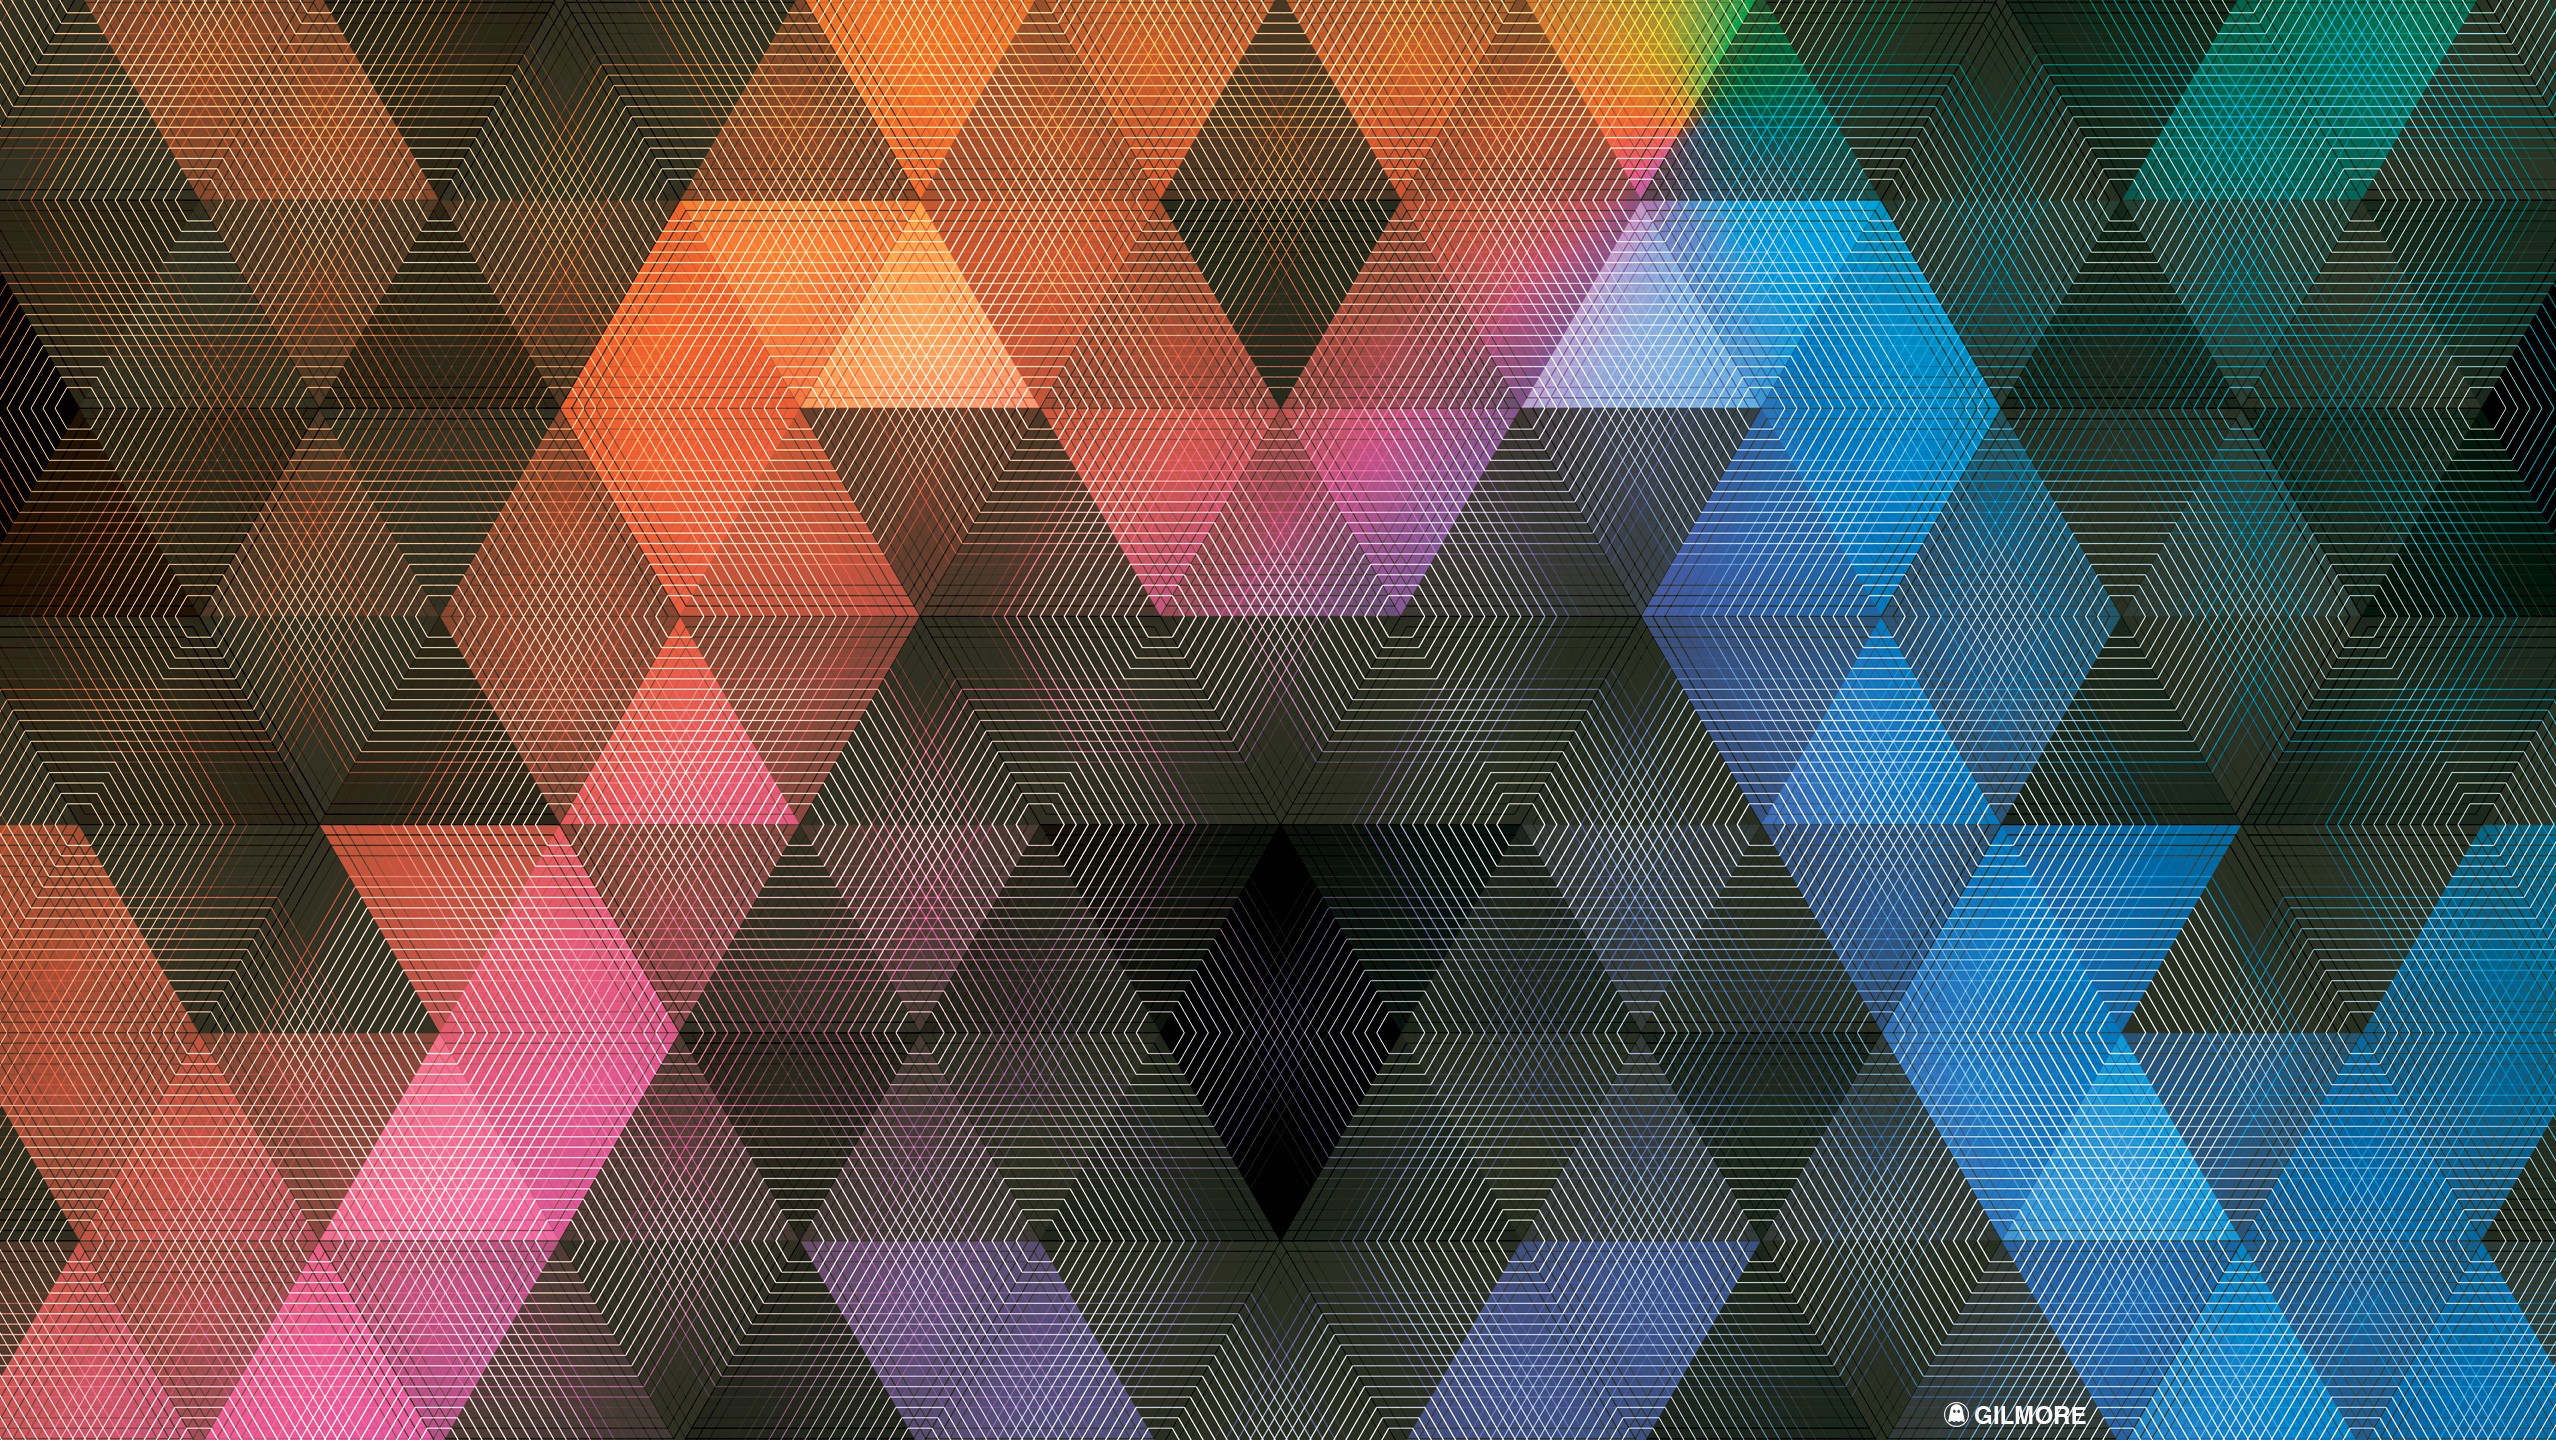 General 2556x1440 abstract pattern Andy Gilmore geometry colorful geometric figures texture digital art